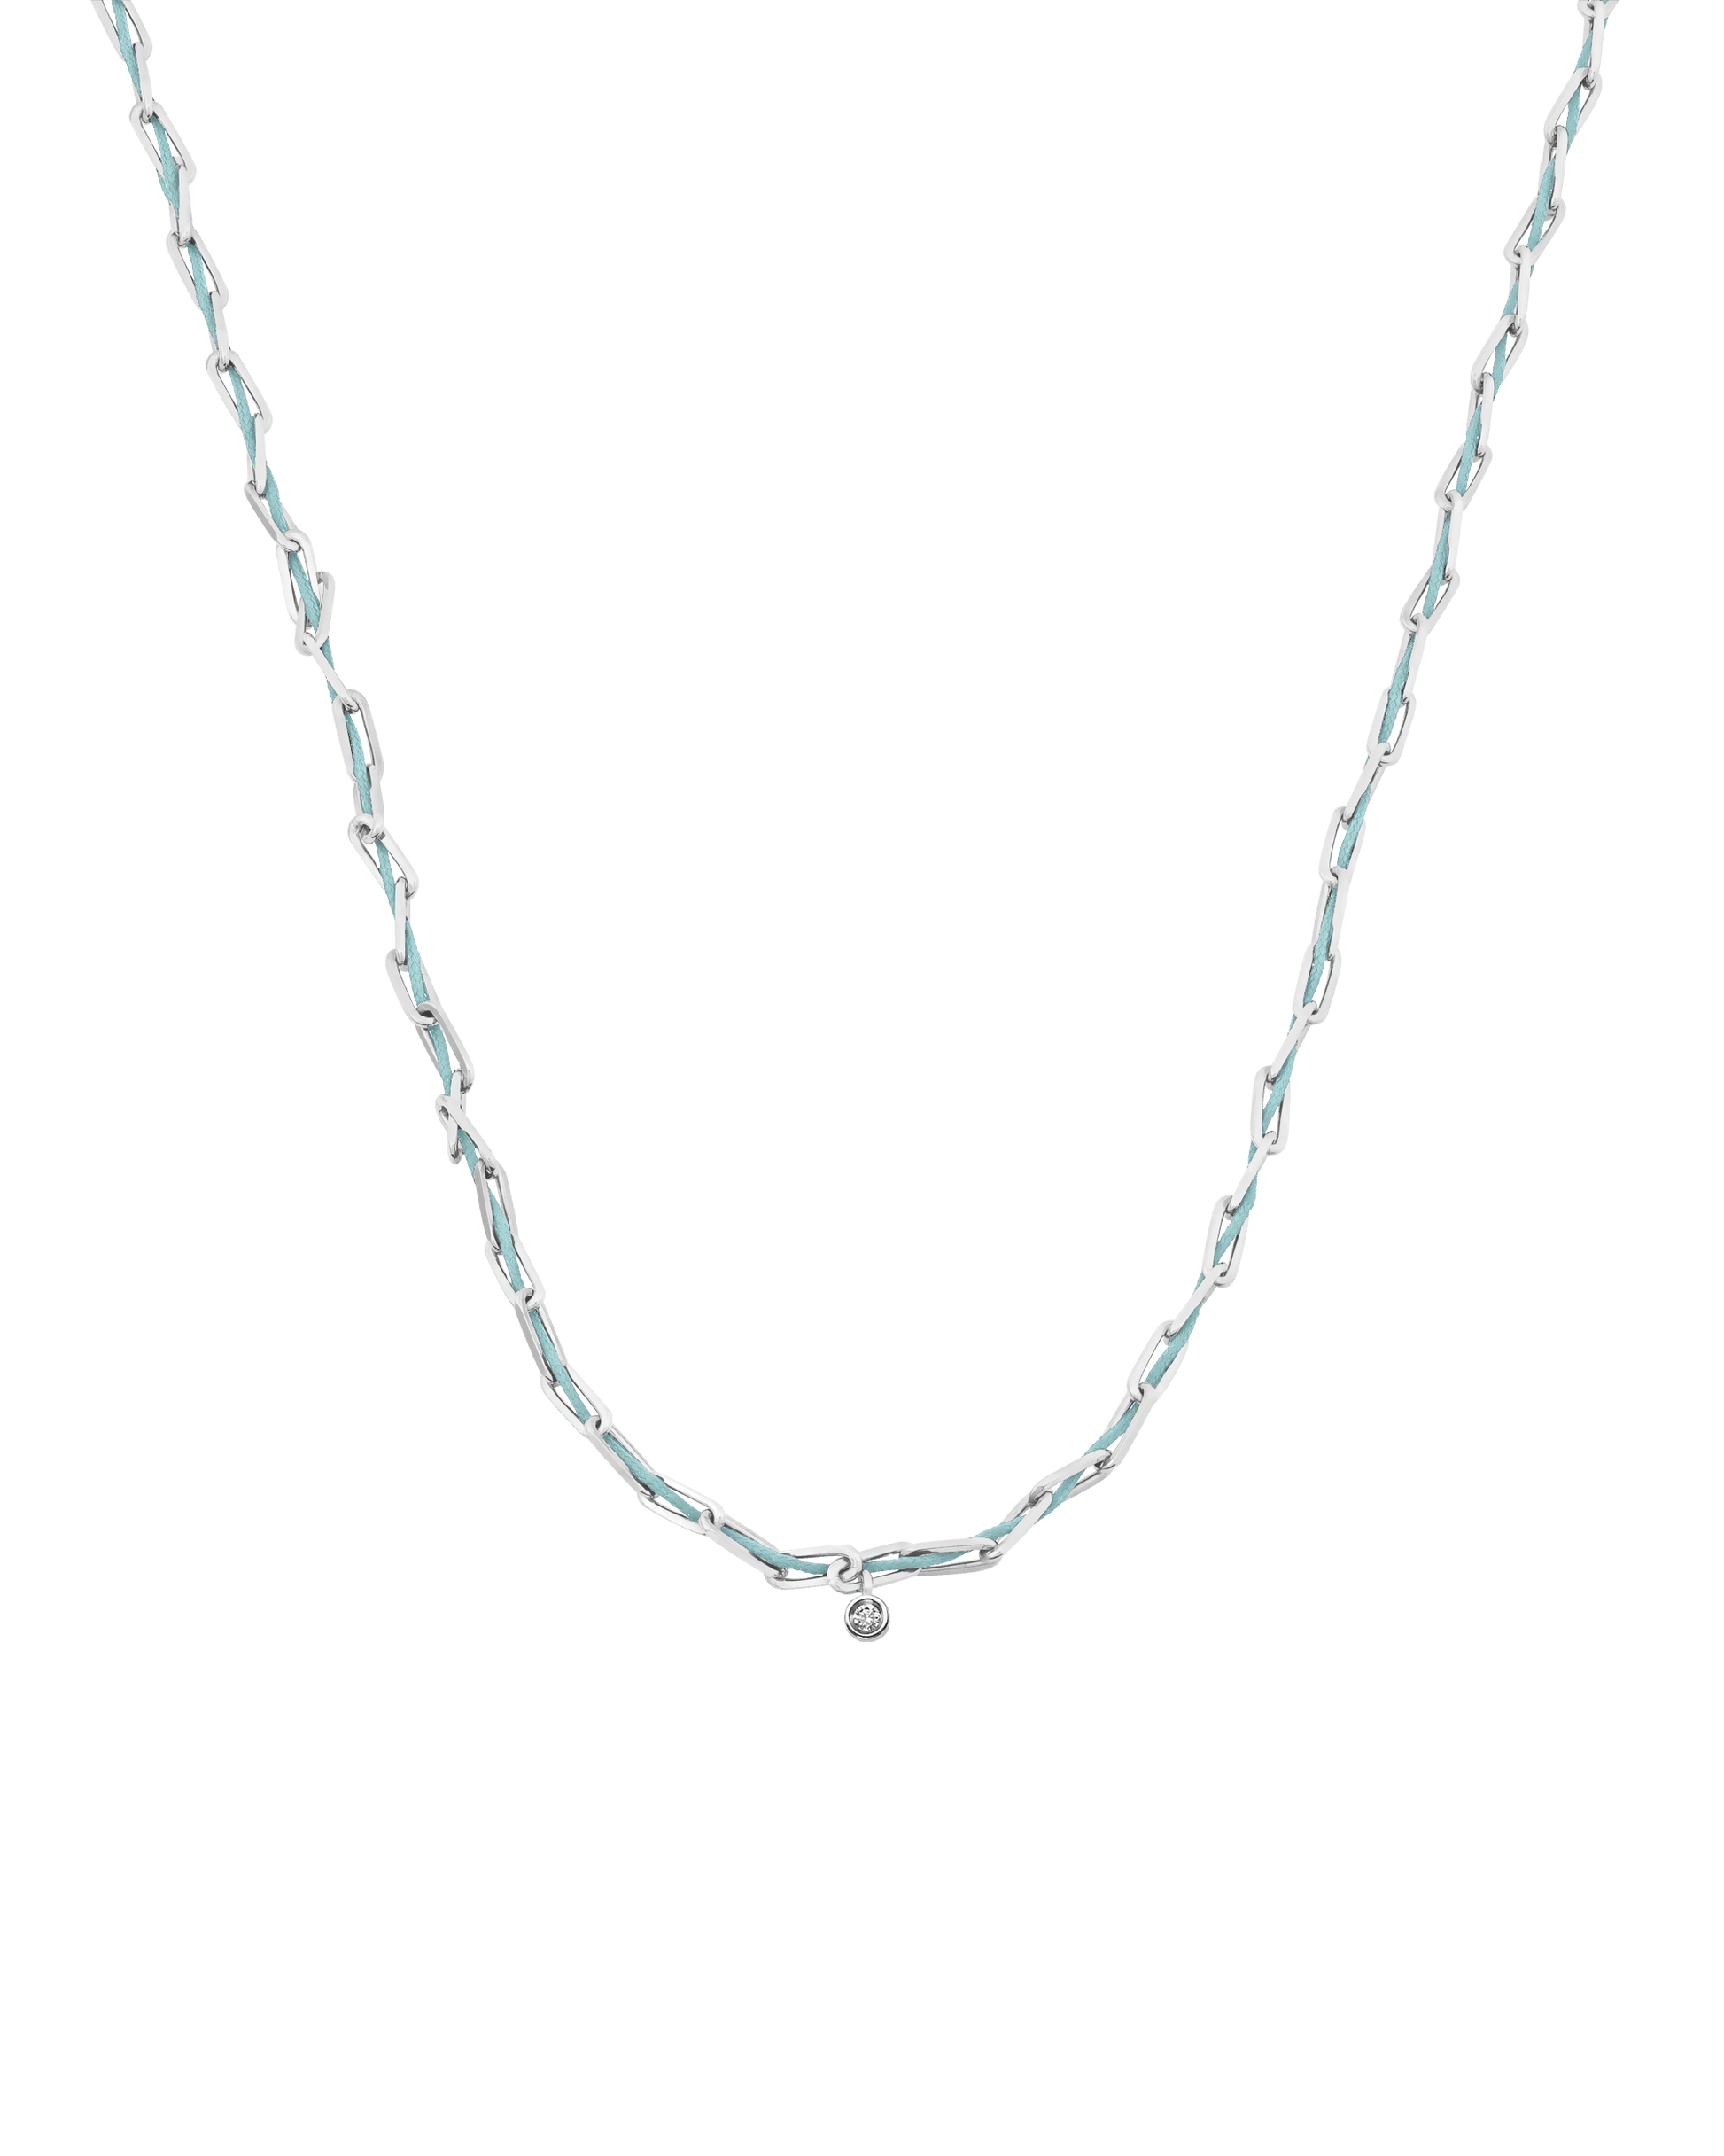 Twine Diamond Necklace - 925 Sterling Silver Necklaces magal-dev Turquoise Small: 0.03ct 16"